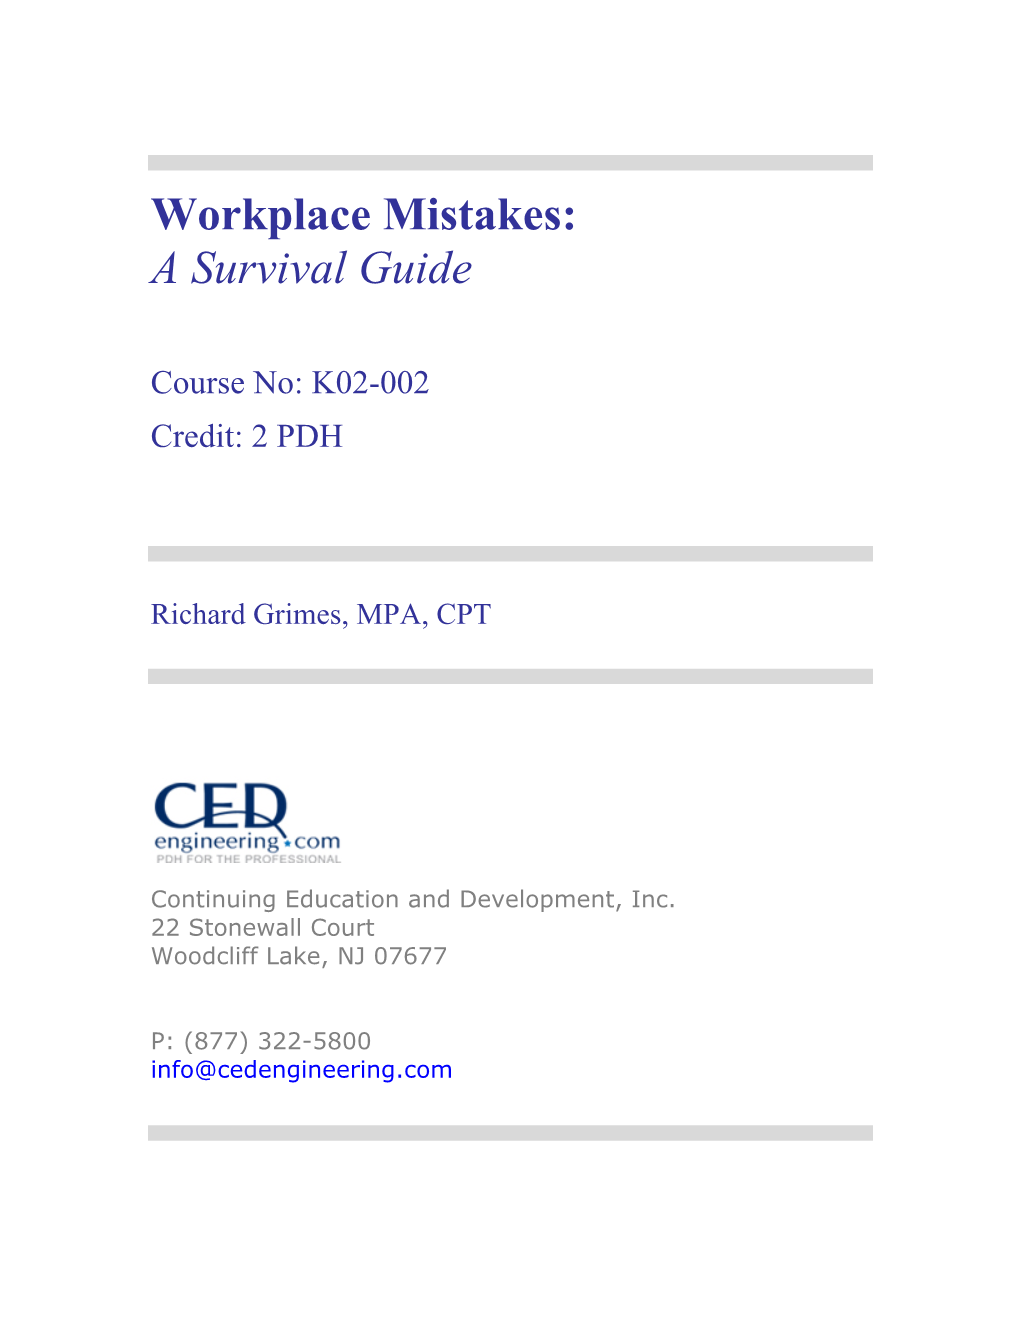 Workplace Mistakes: a Survival Guide